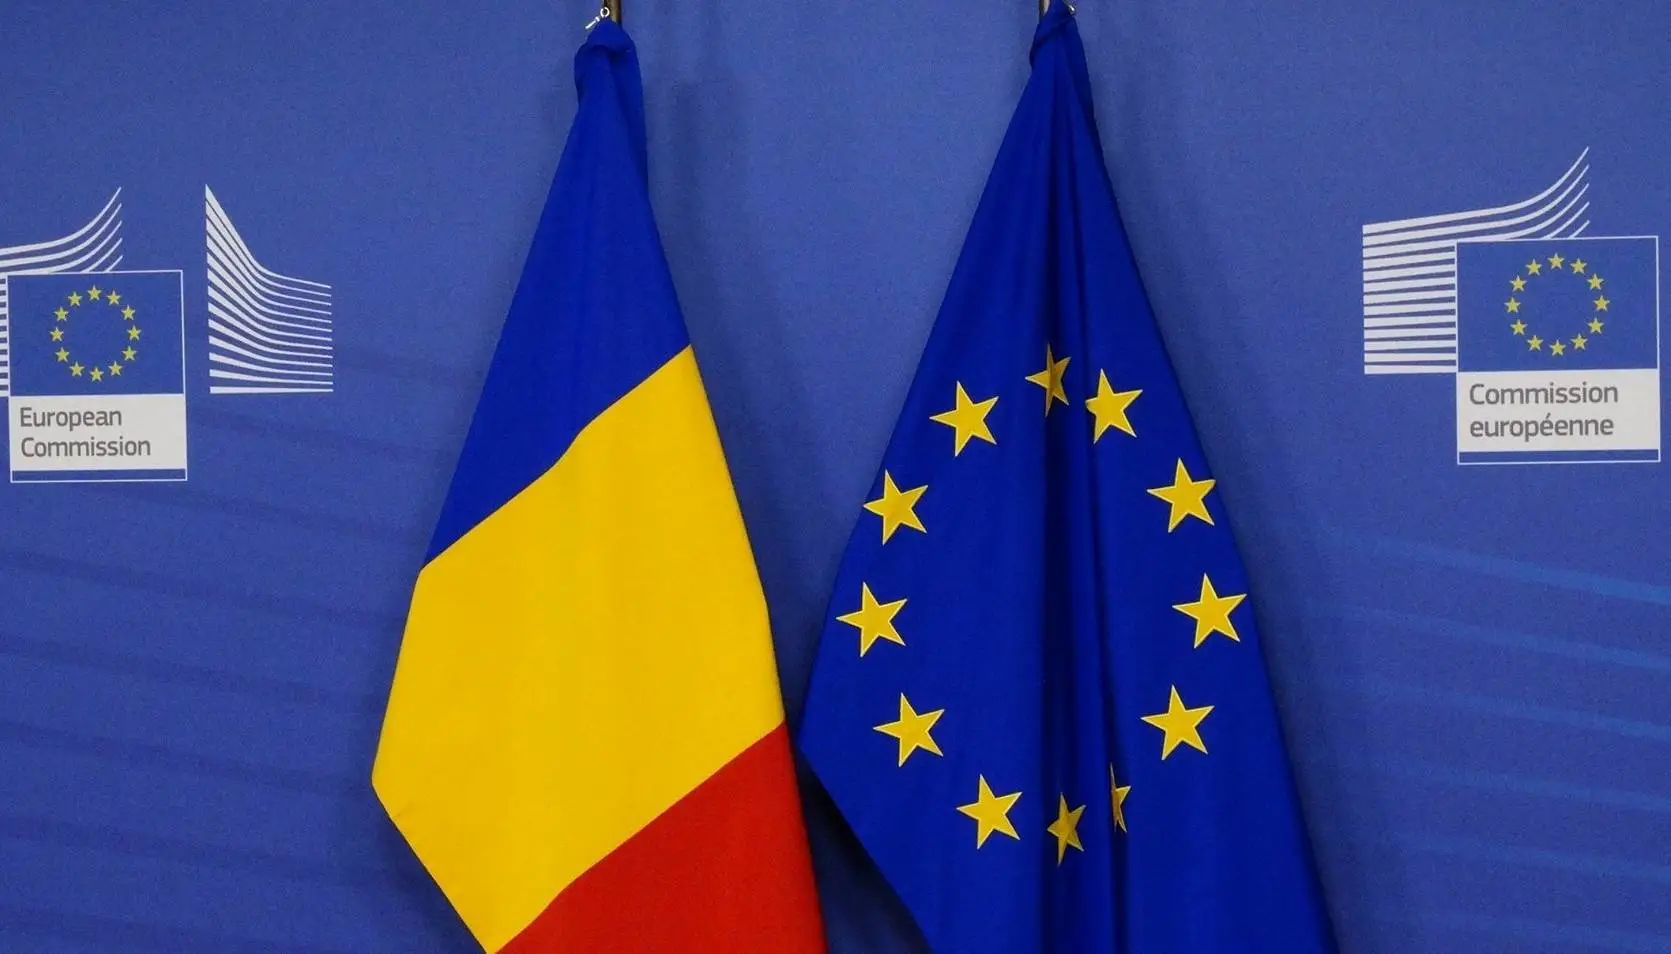 Announcement of the European Commission, Amount of Money Approved for Romania